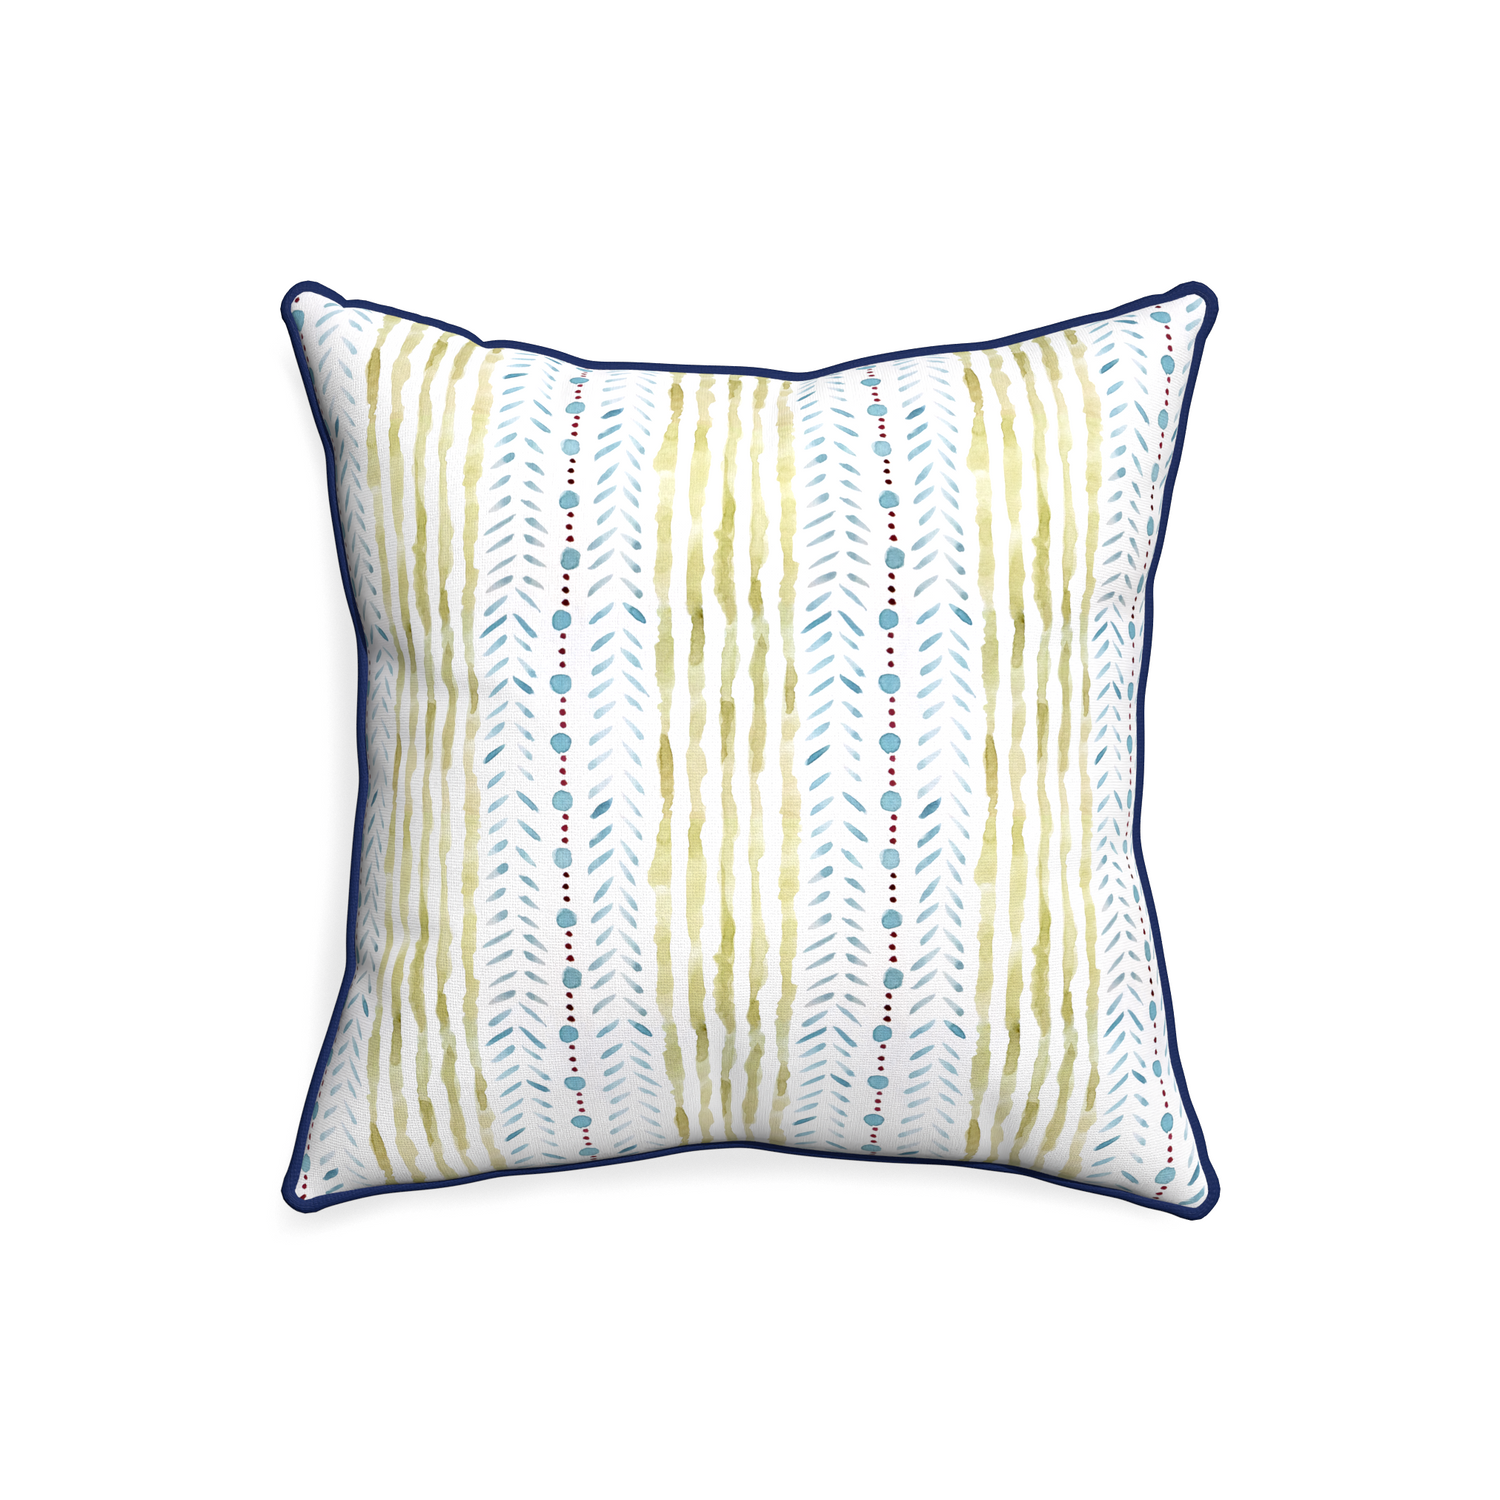 20-square julia custom blue & green stripedpillow with midnight piping on white background